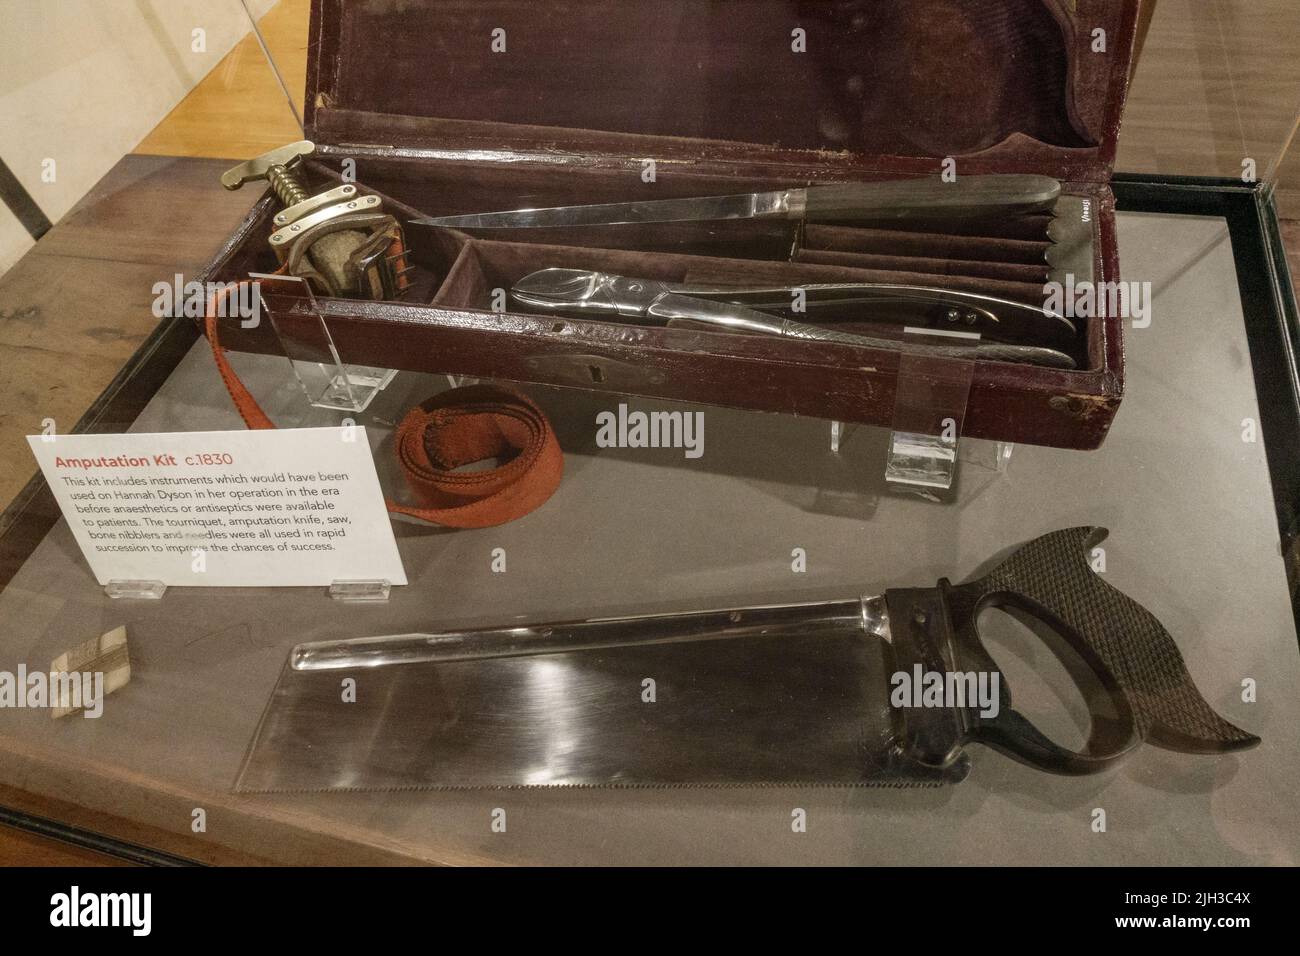 An early Victorian amputation kit (c1830) on display in the Thackray ...